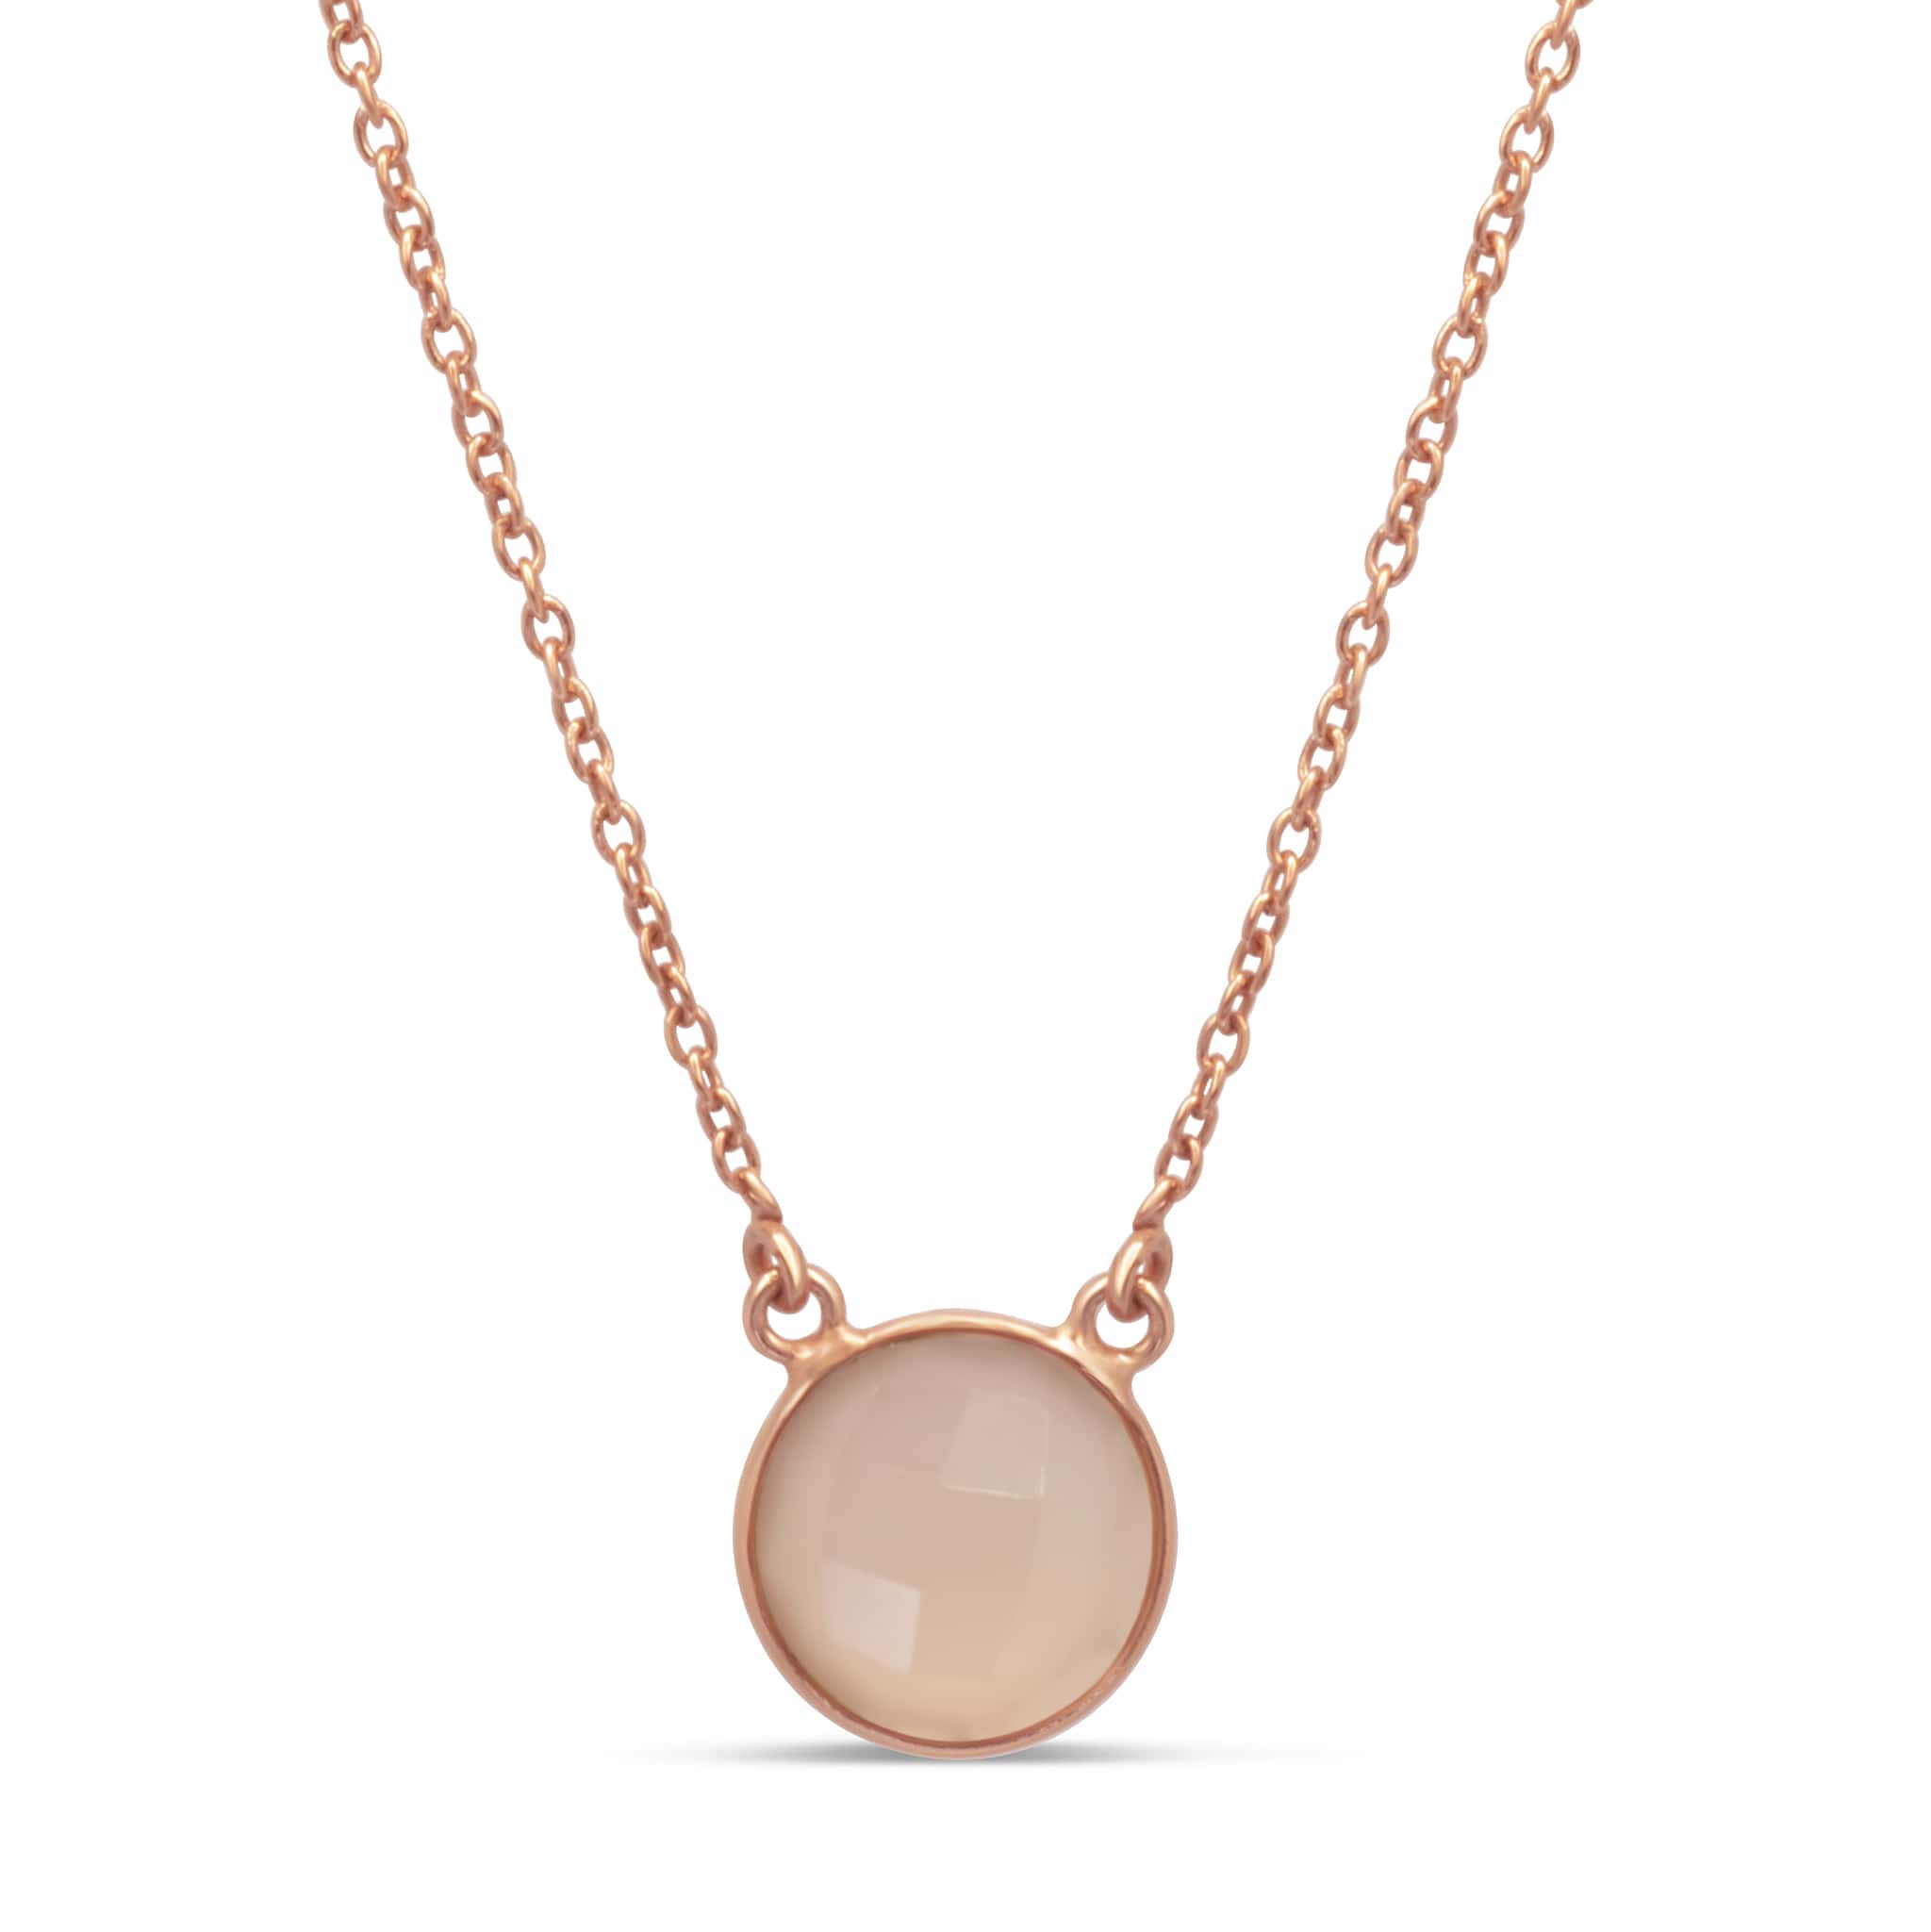 Single semi-precious pink stone necklace in rose gold plated